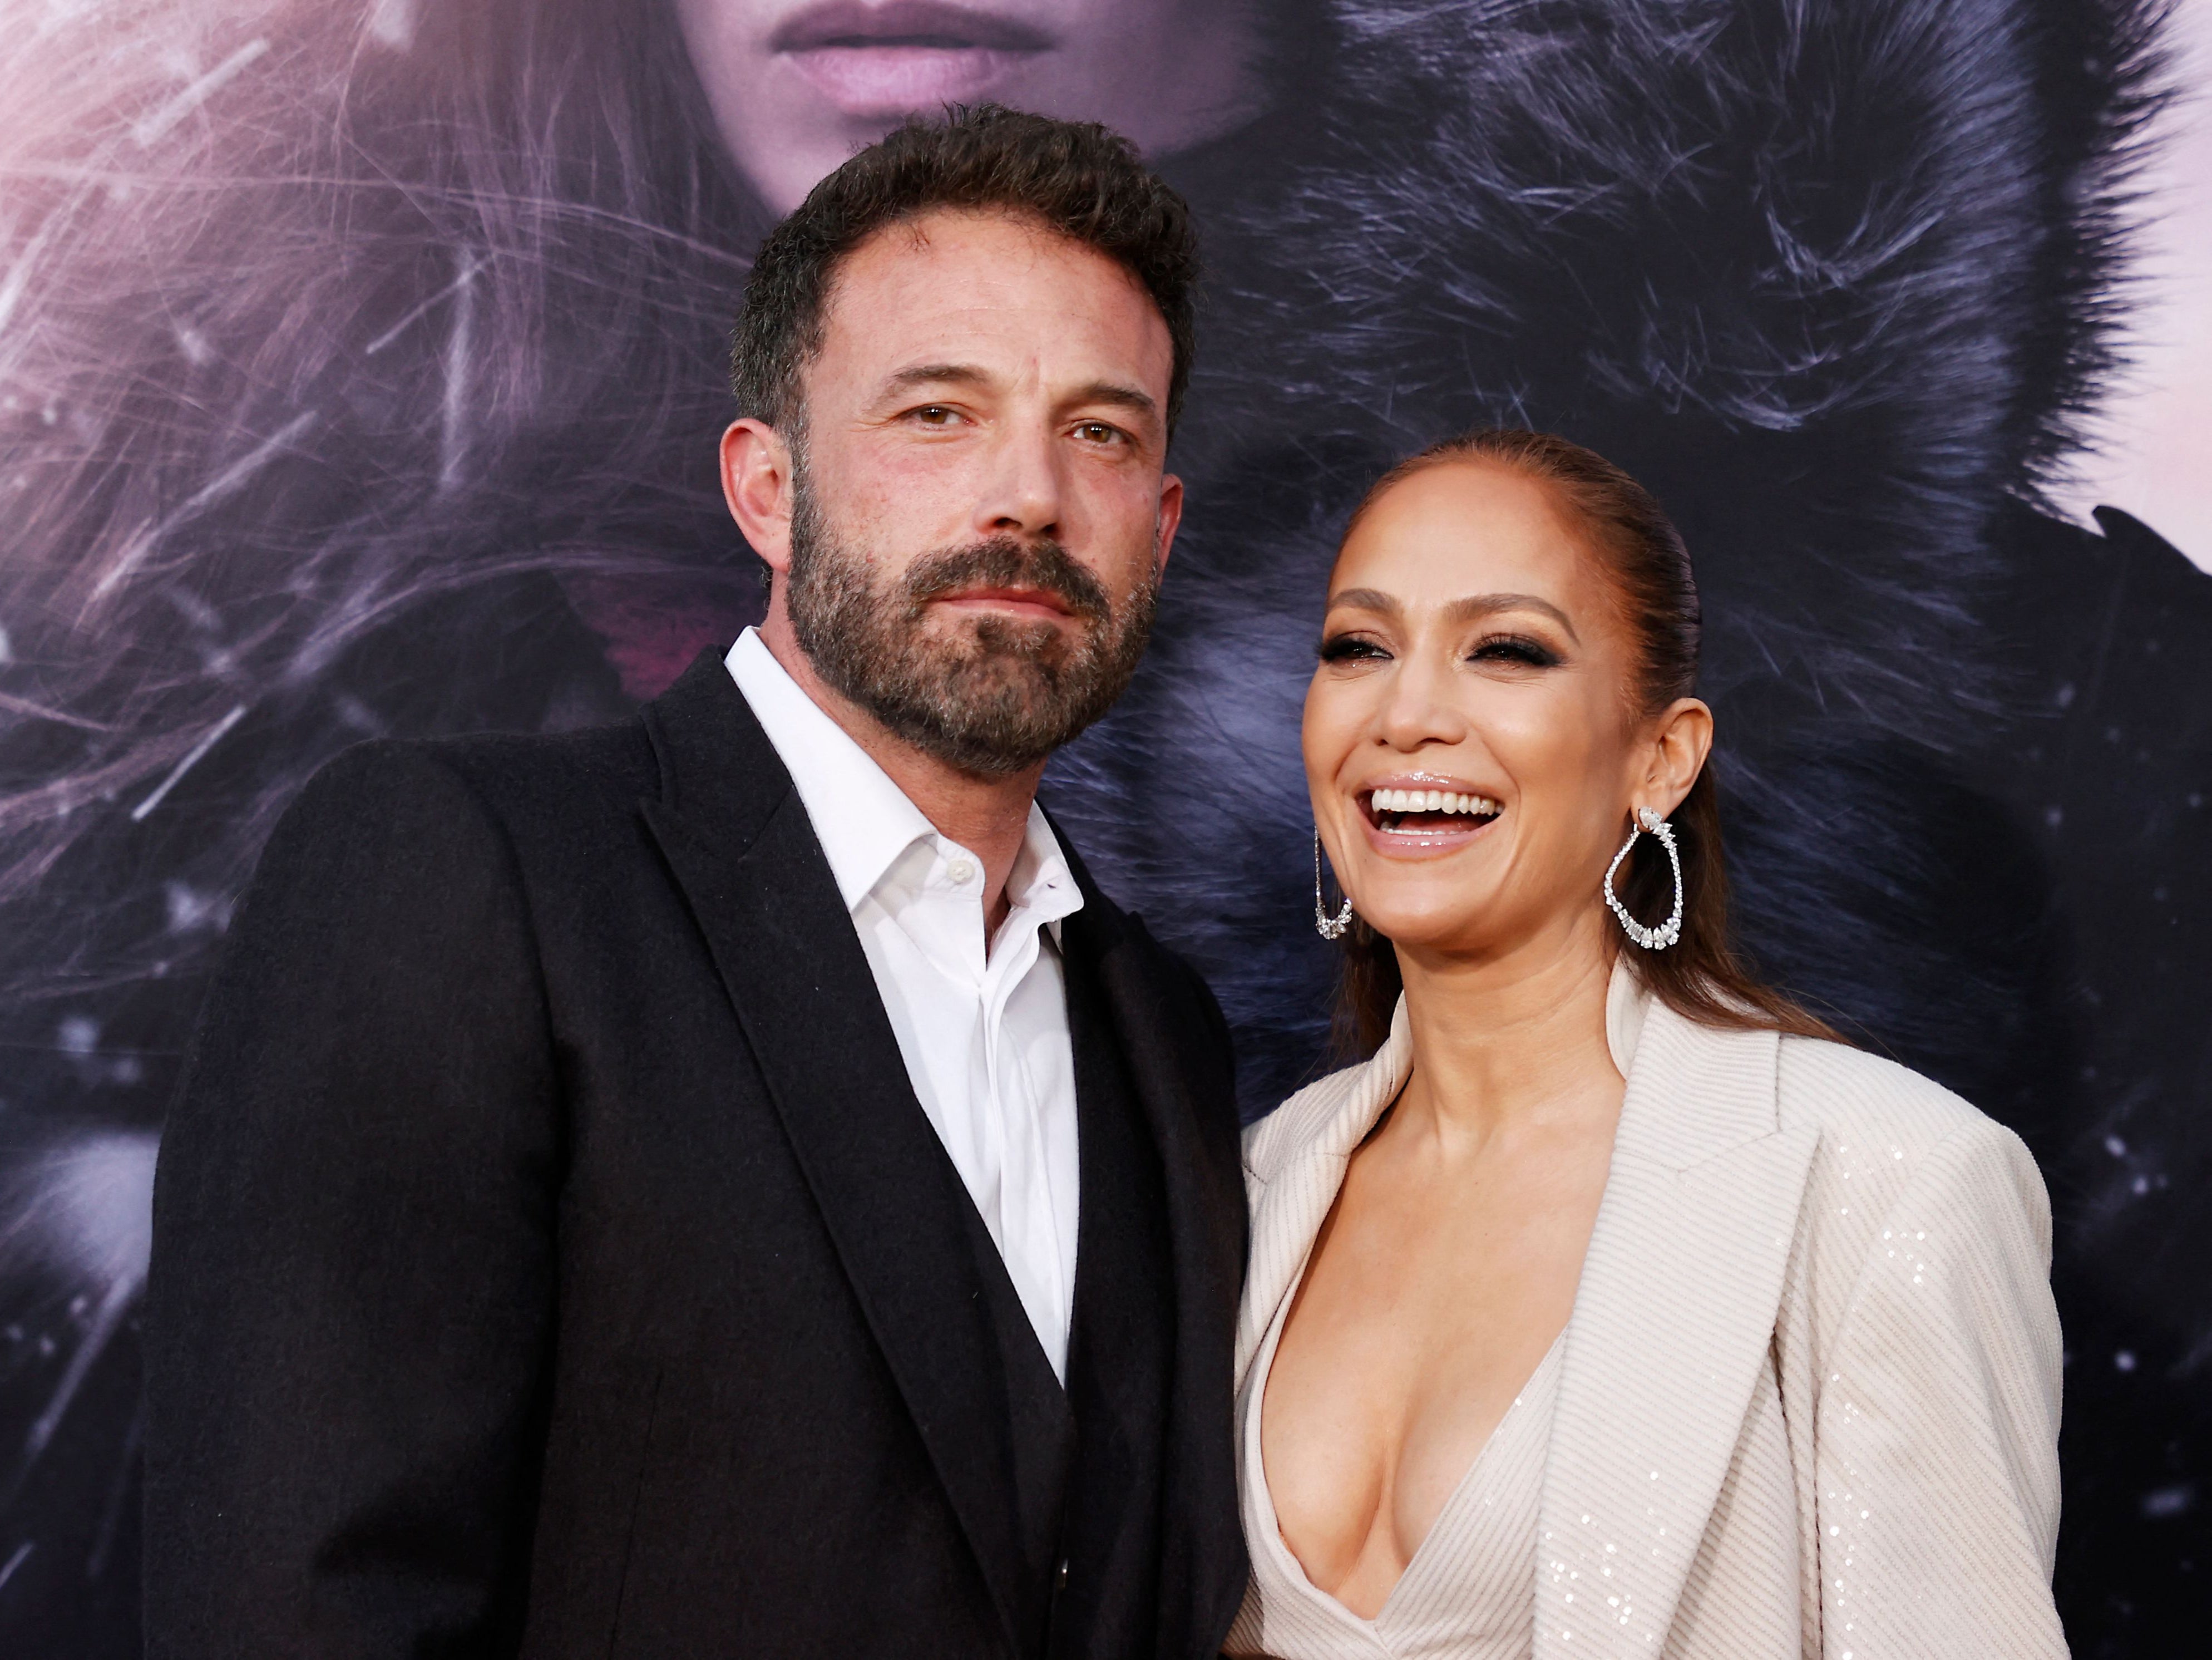 Ben Affleck and Jennifer Lopez are reportedly on good terms despite strain in their marriage